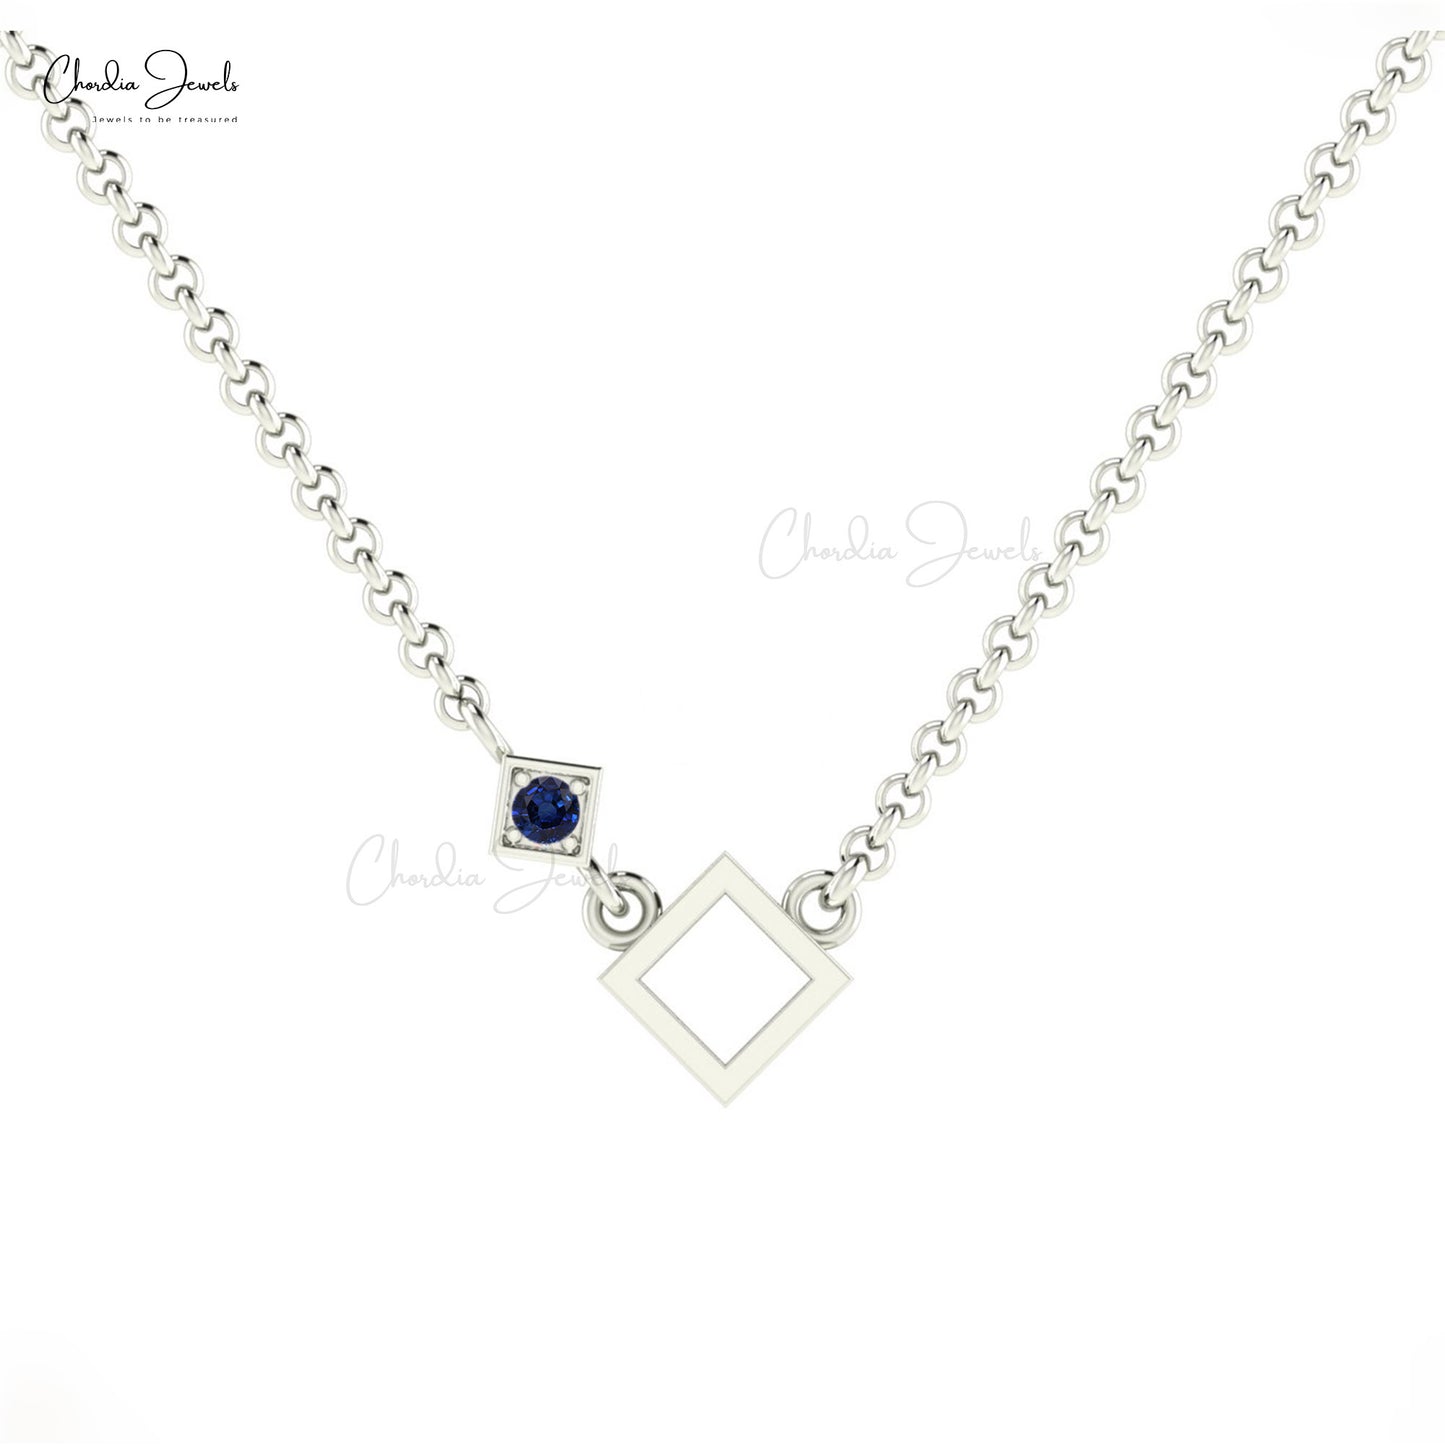 Load image into Gallery viewer, New Fashion Vintage Natural Gemstone Accented Necklace Pendant in 14k Real Gold 2.50mm Blue Sapphire Necklace Hallmarked Jewelry For Women
